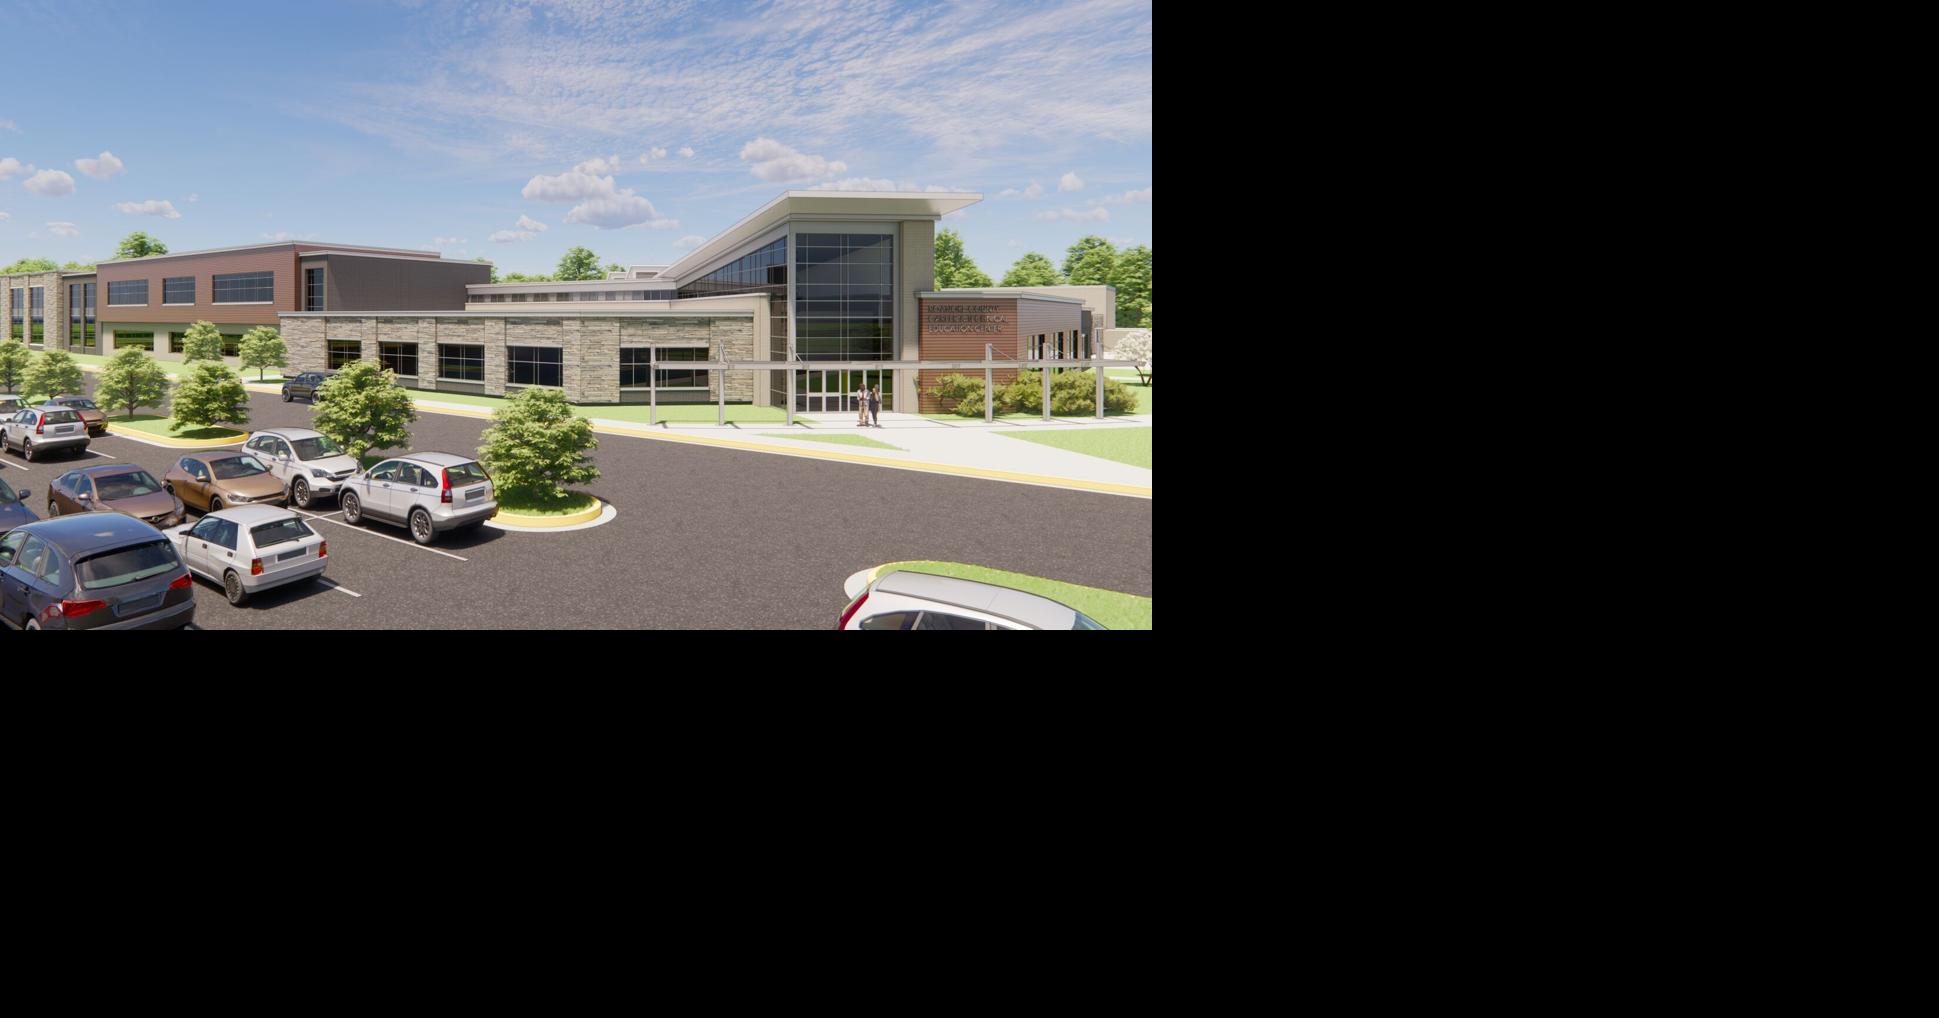 New Technology Education Center named by Roanoke County